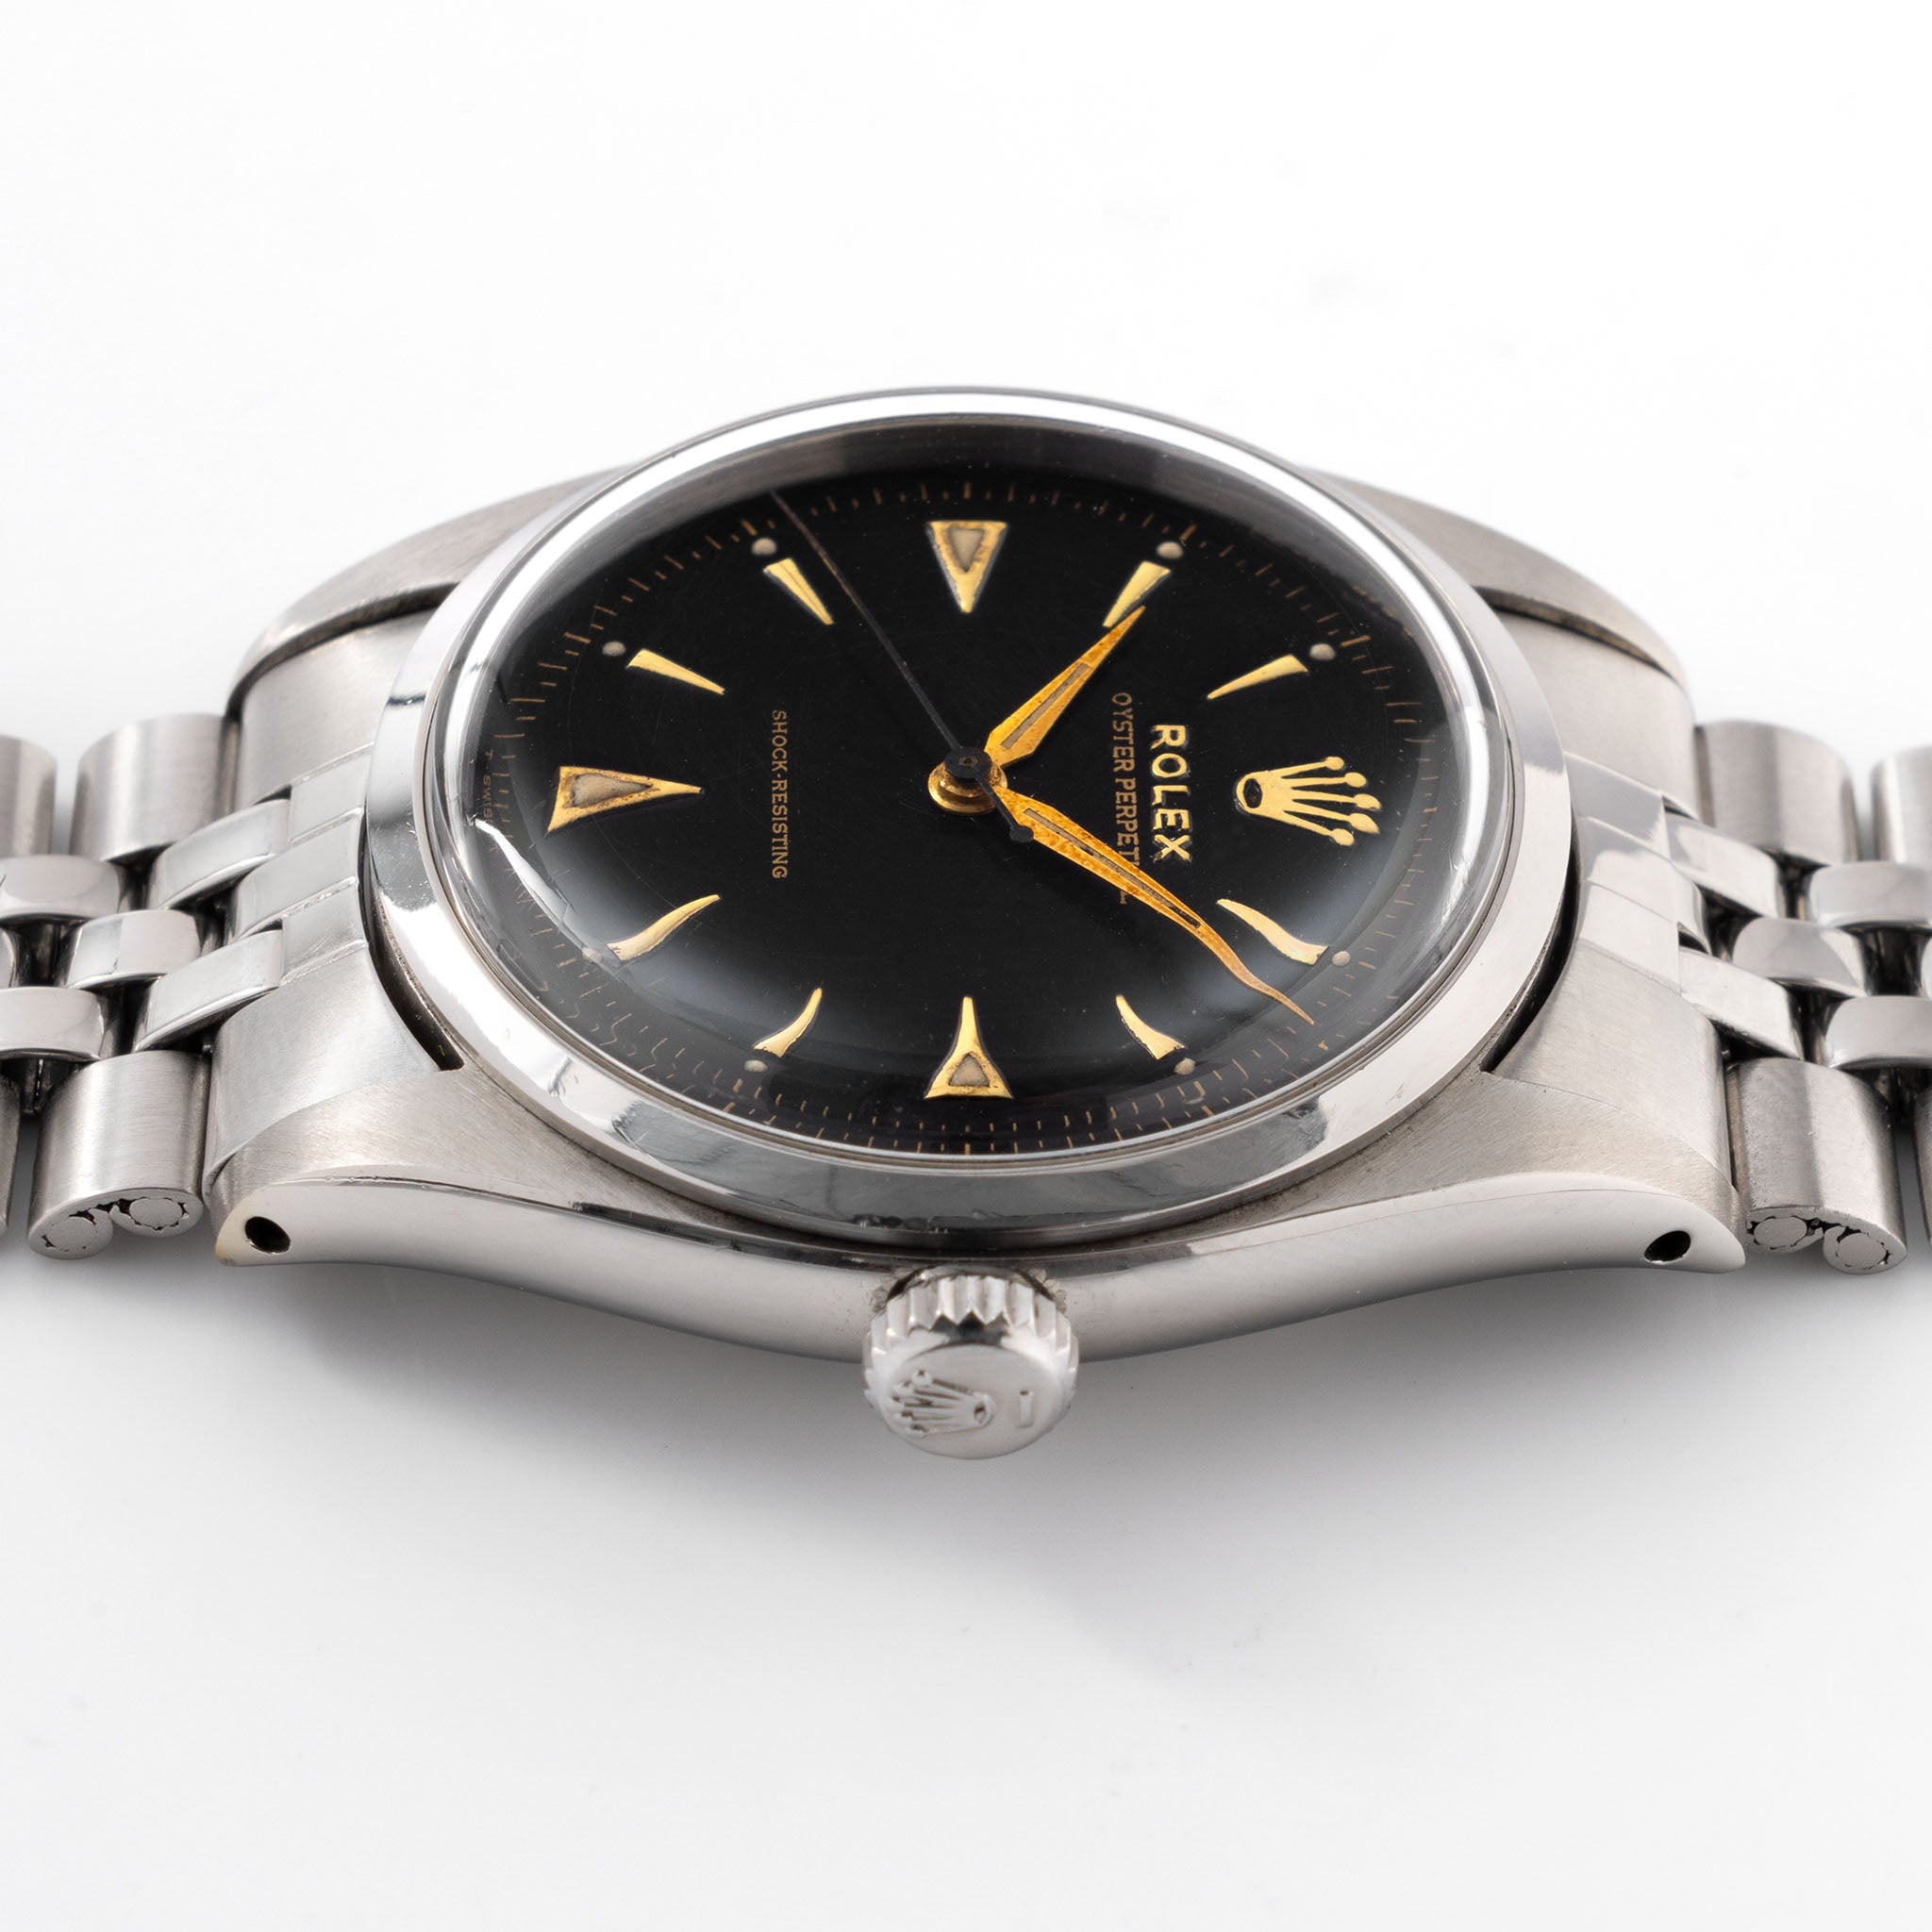 Rolex Oyster Perpetual Ovettone Black Dial Ref 6352